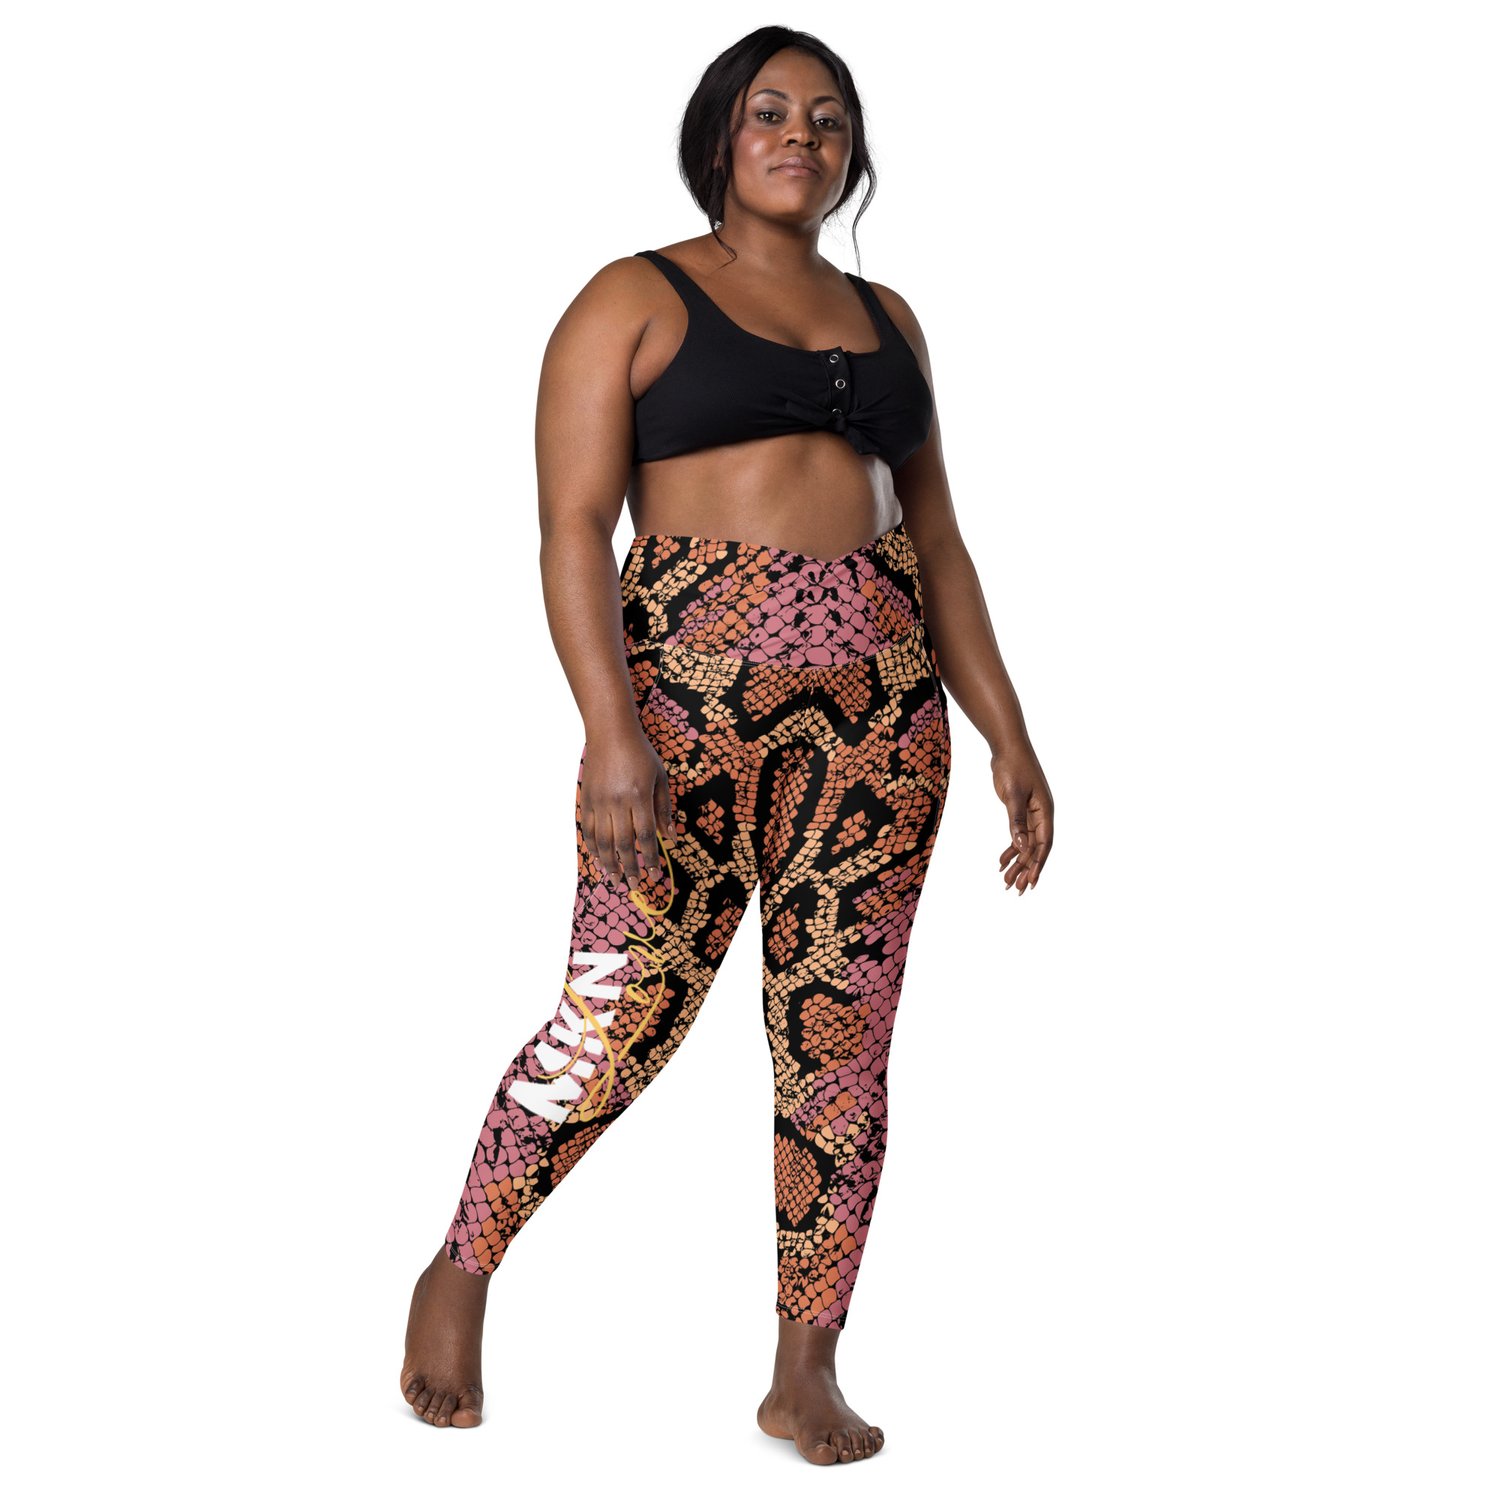 PYNK MKN LOVE Crossover leggings with pockets — MKN Love Lifestyle Brand